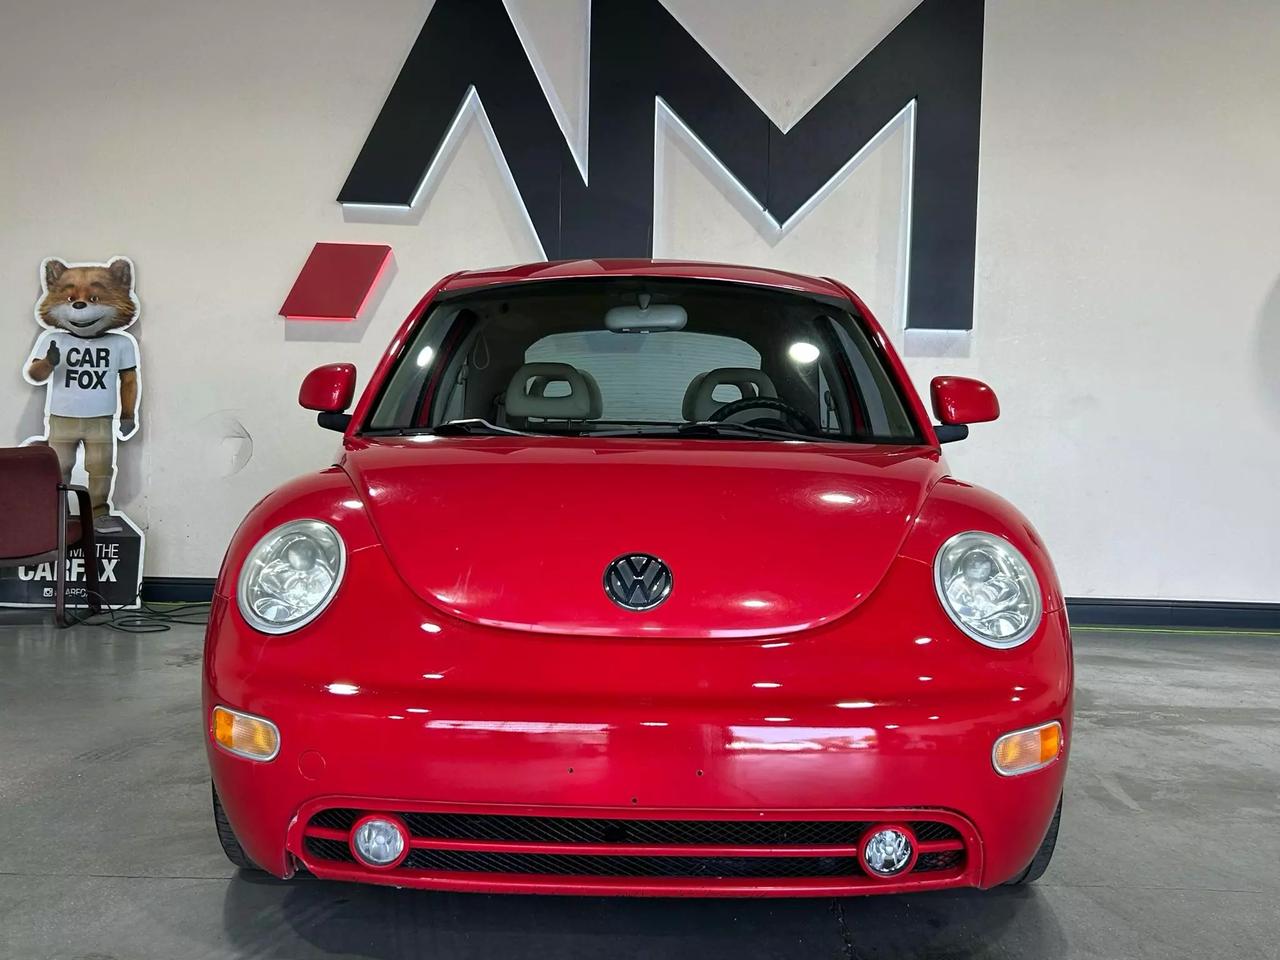 Used 1999 Volkswagen New Beetle GLS with VIN 3VWCC21C1XM410268 for sale in Sacramento, CA